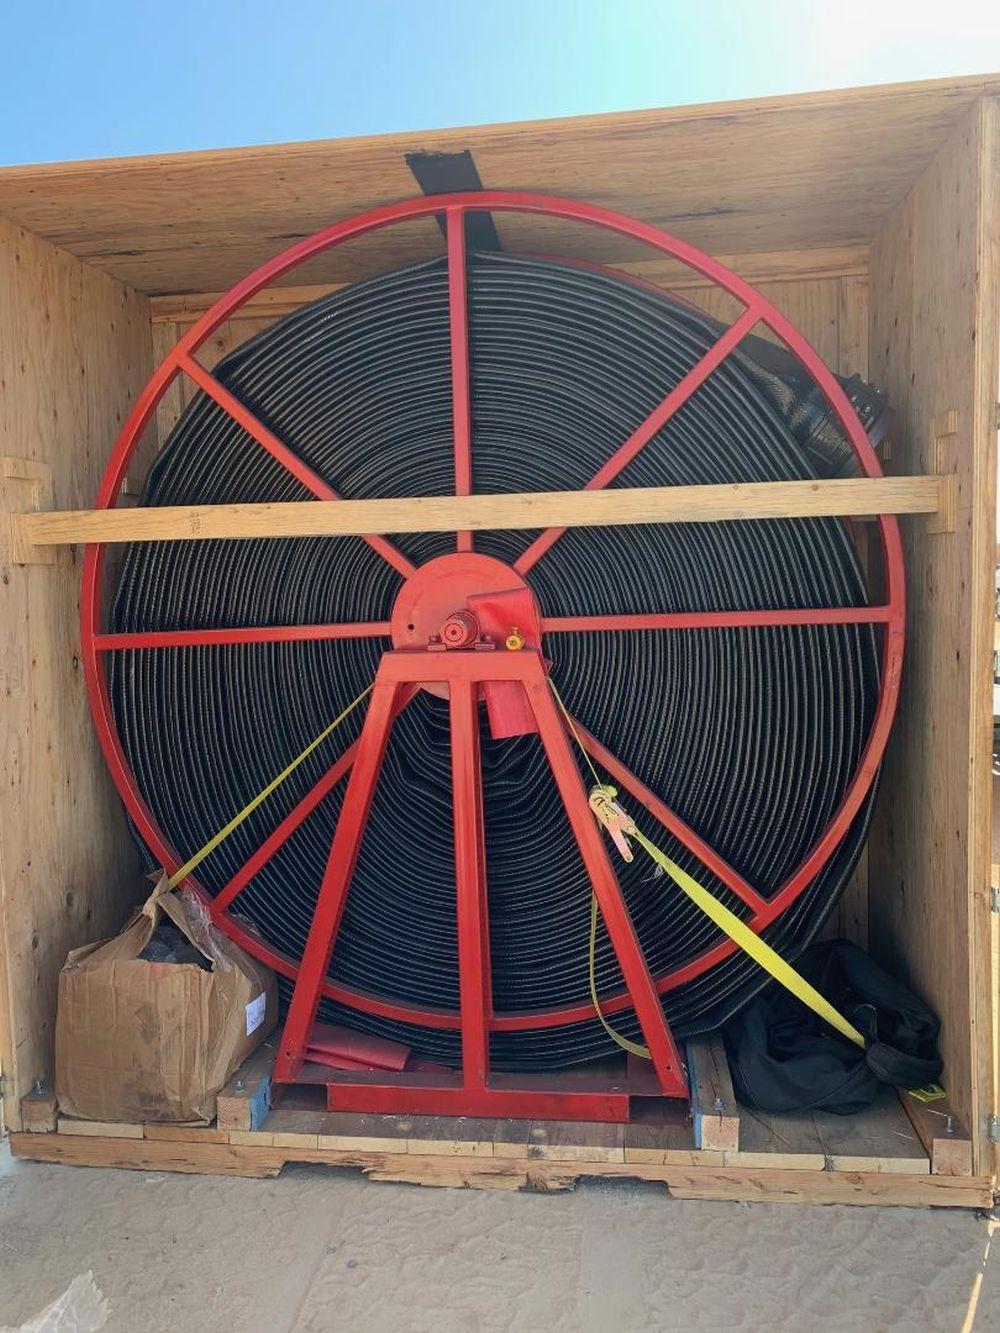 10" New Layflat Hose and Reel